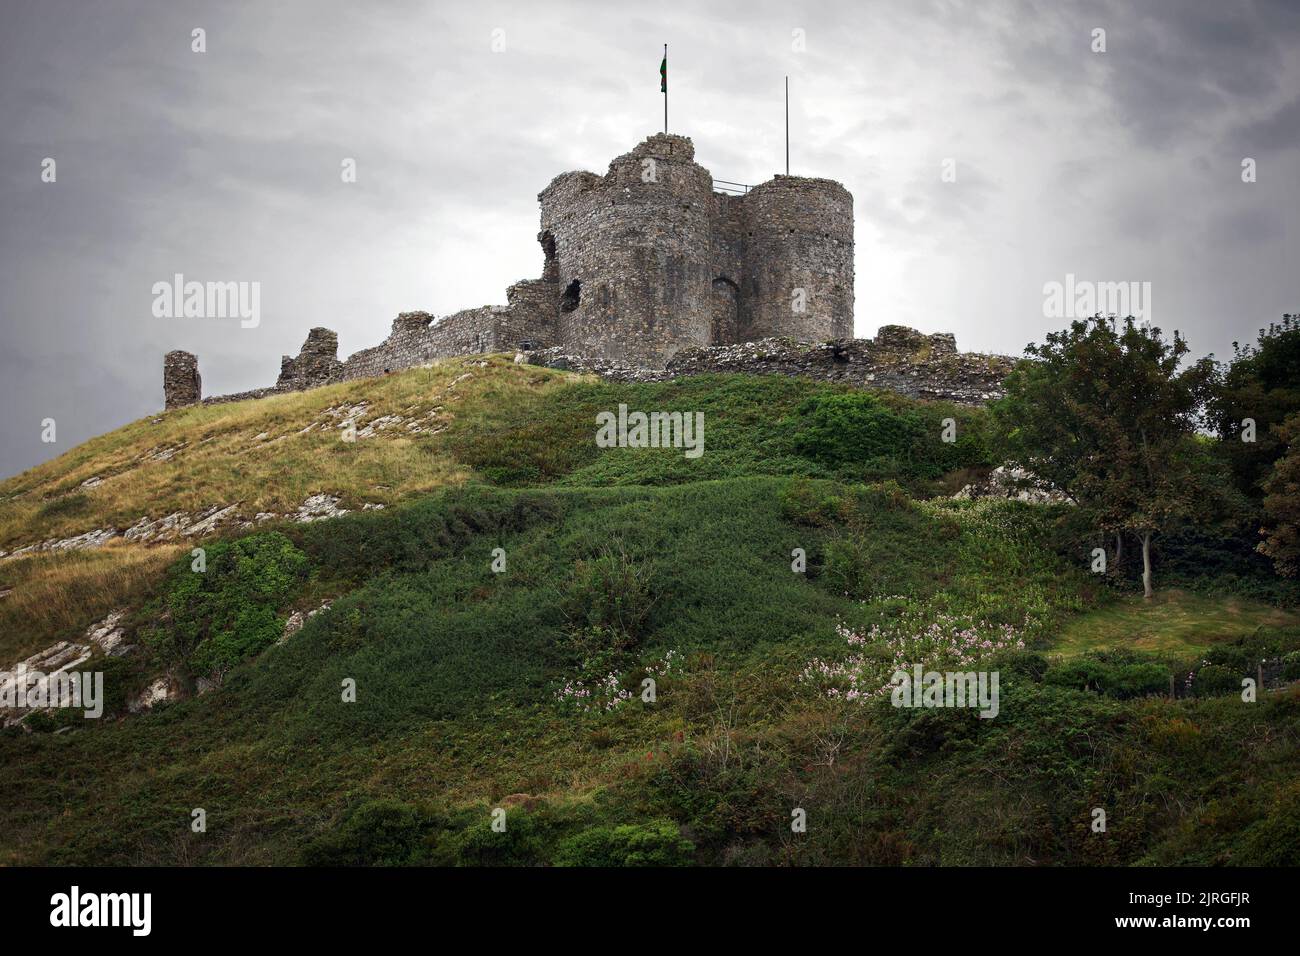 Criccieth Castle is a native Welsh castle situated on a headland in Criccieth, Gwynedd, North Wales, It was built by Llywelyn the Great in 1239. Stock Photo